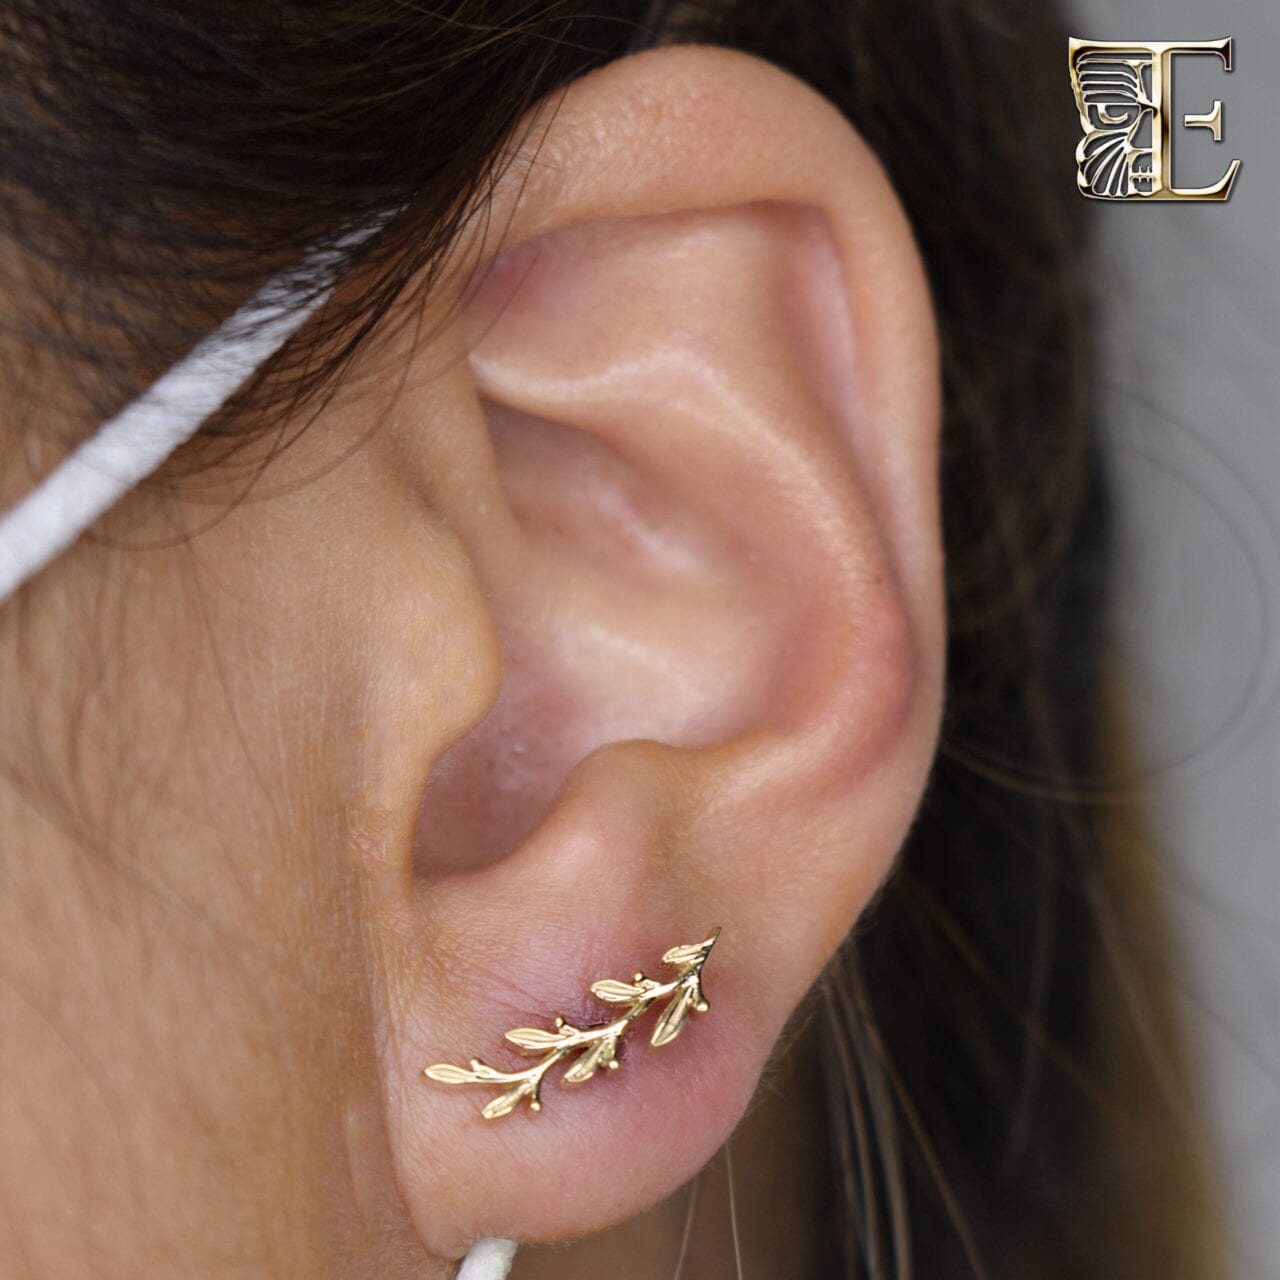 Earlobe pierced with a yellow gold threaded leaf end from BVLA